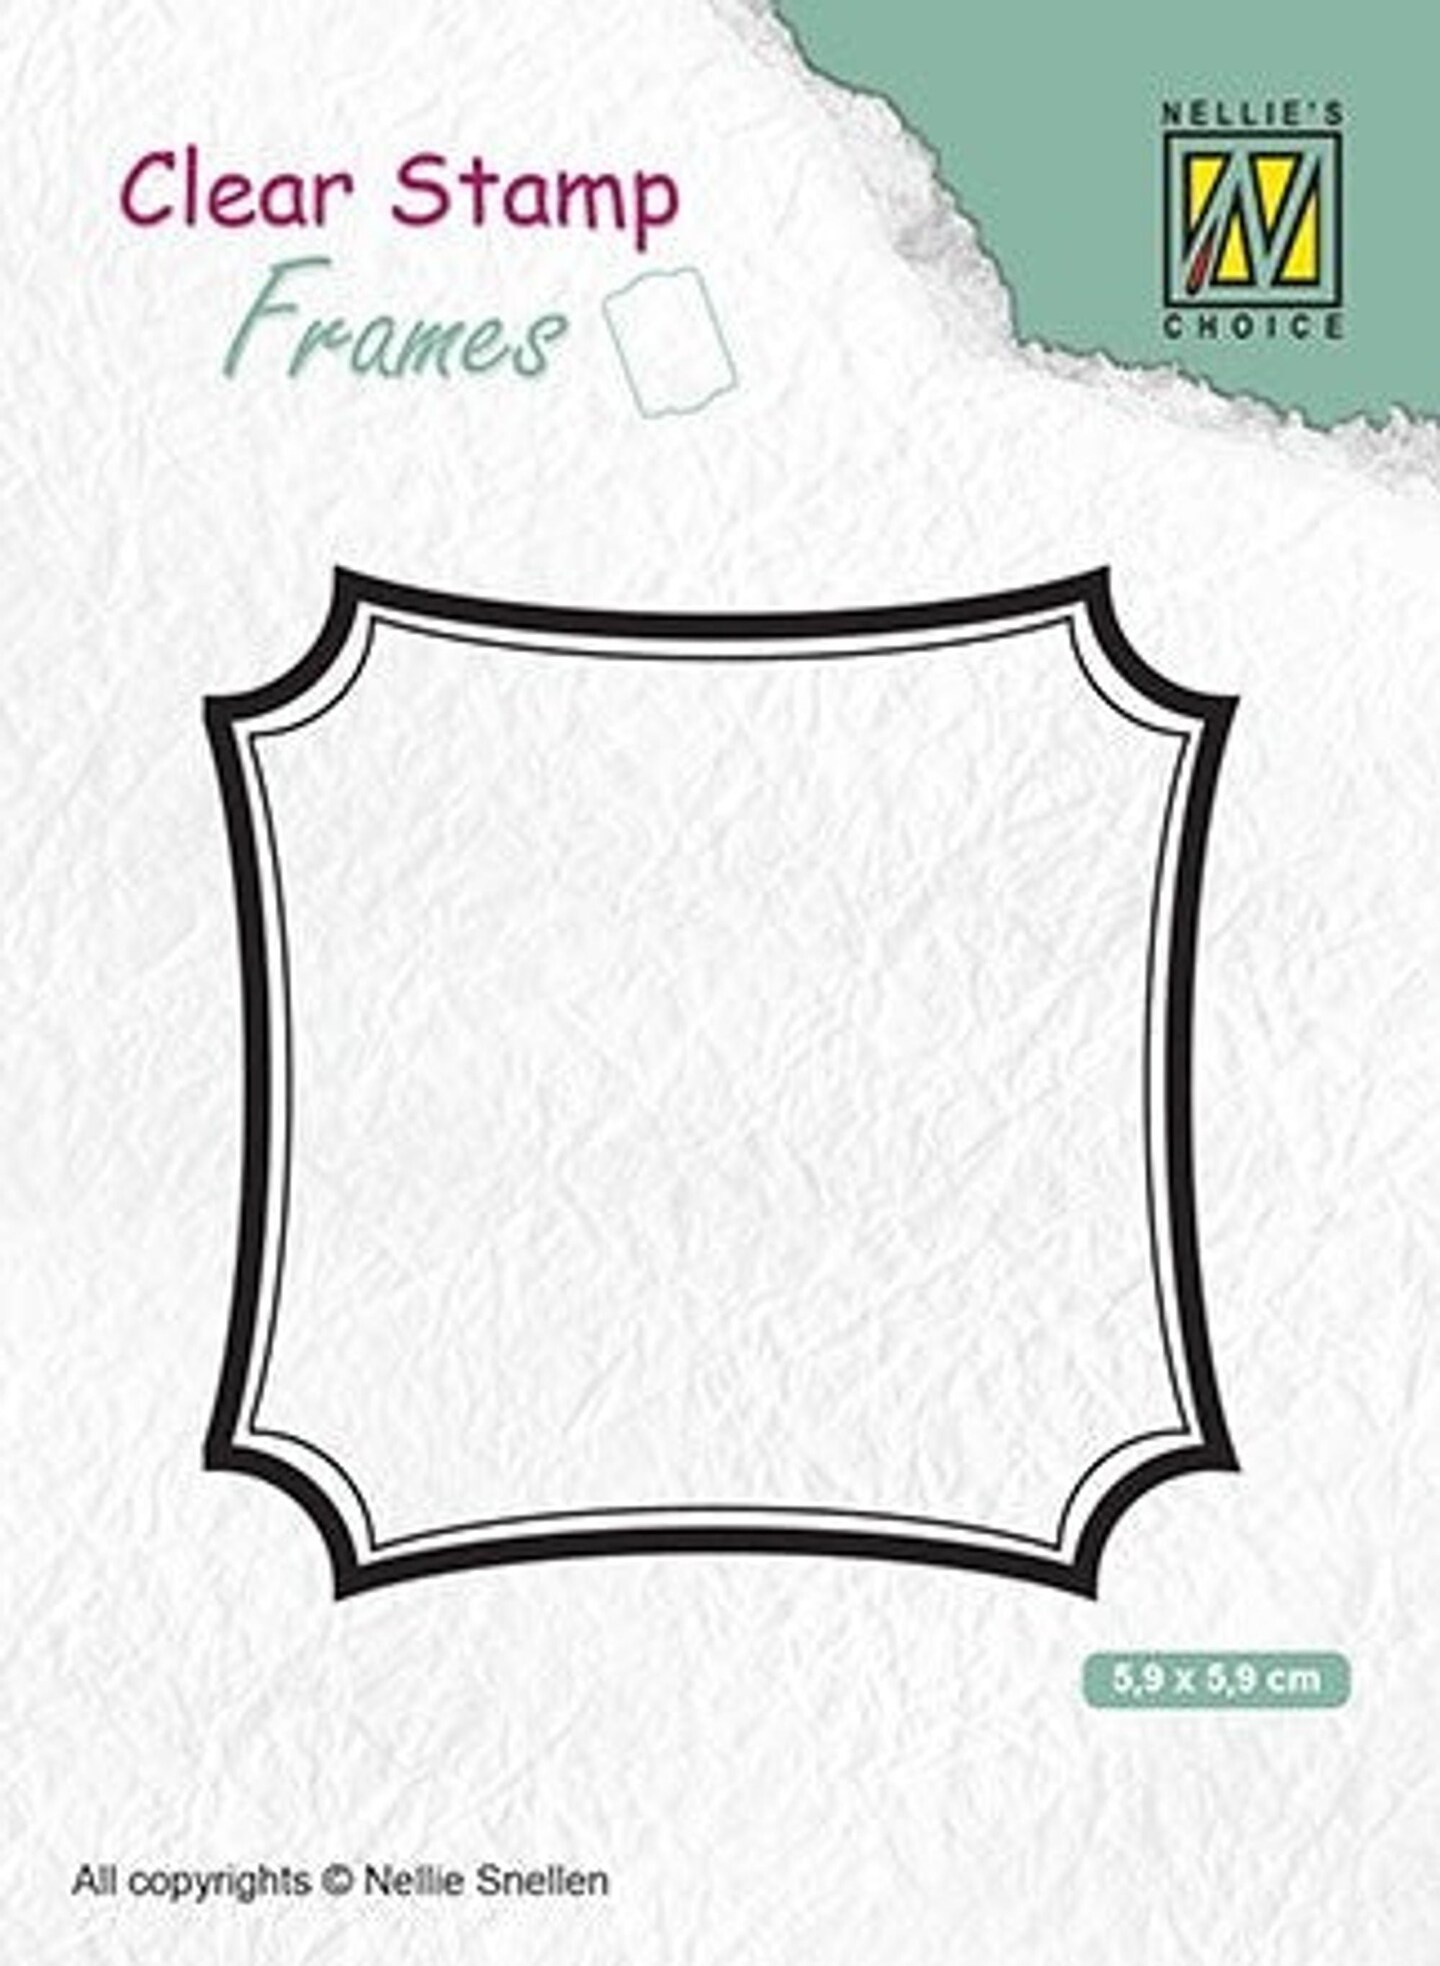 Nellie&#x27;s Choice Clear Stamp Frame Square 2.5 x 2.5 inches